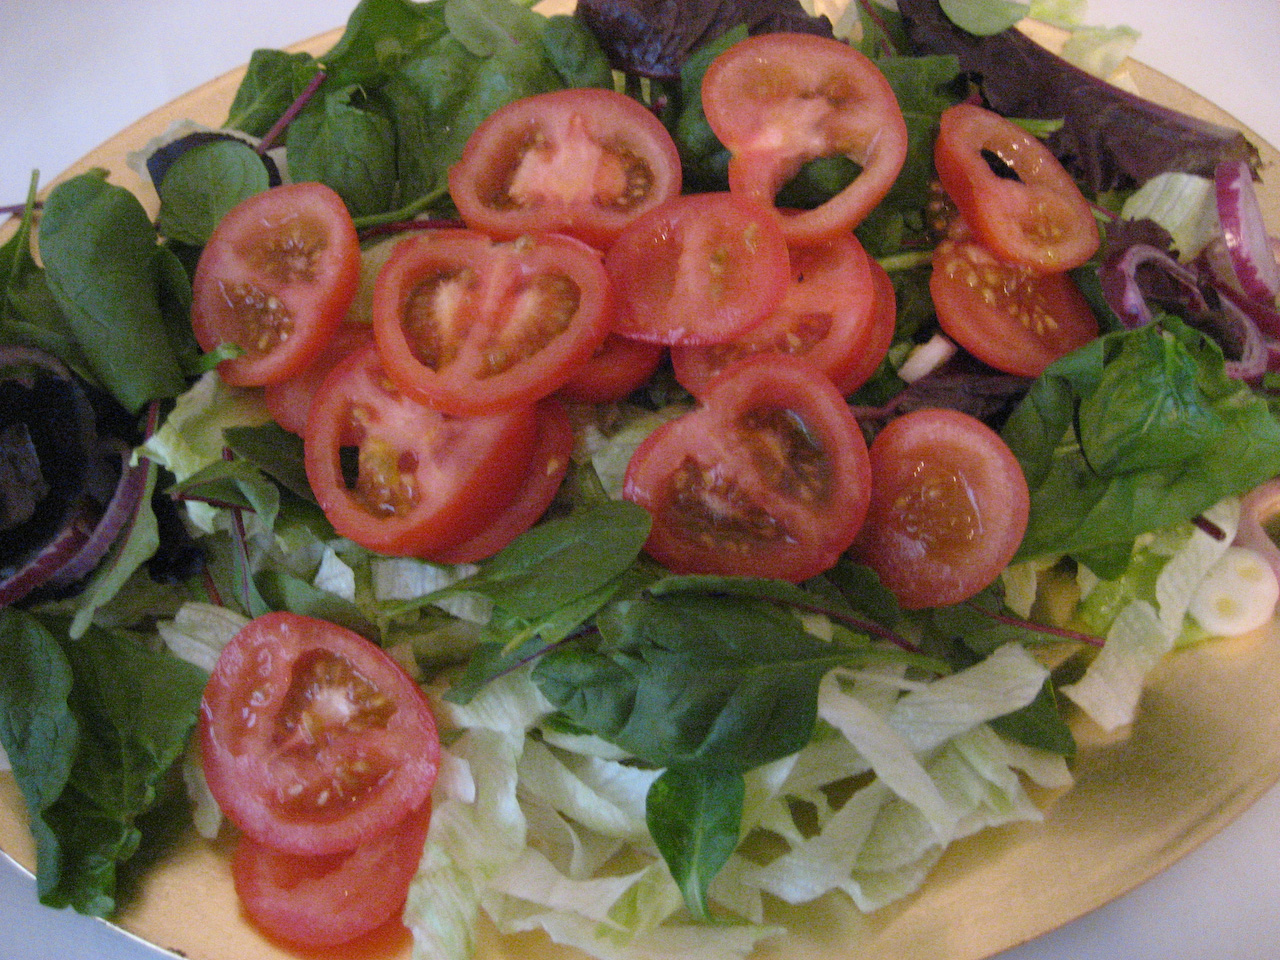 a plate of salad with tomatoes and lettuce